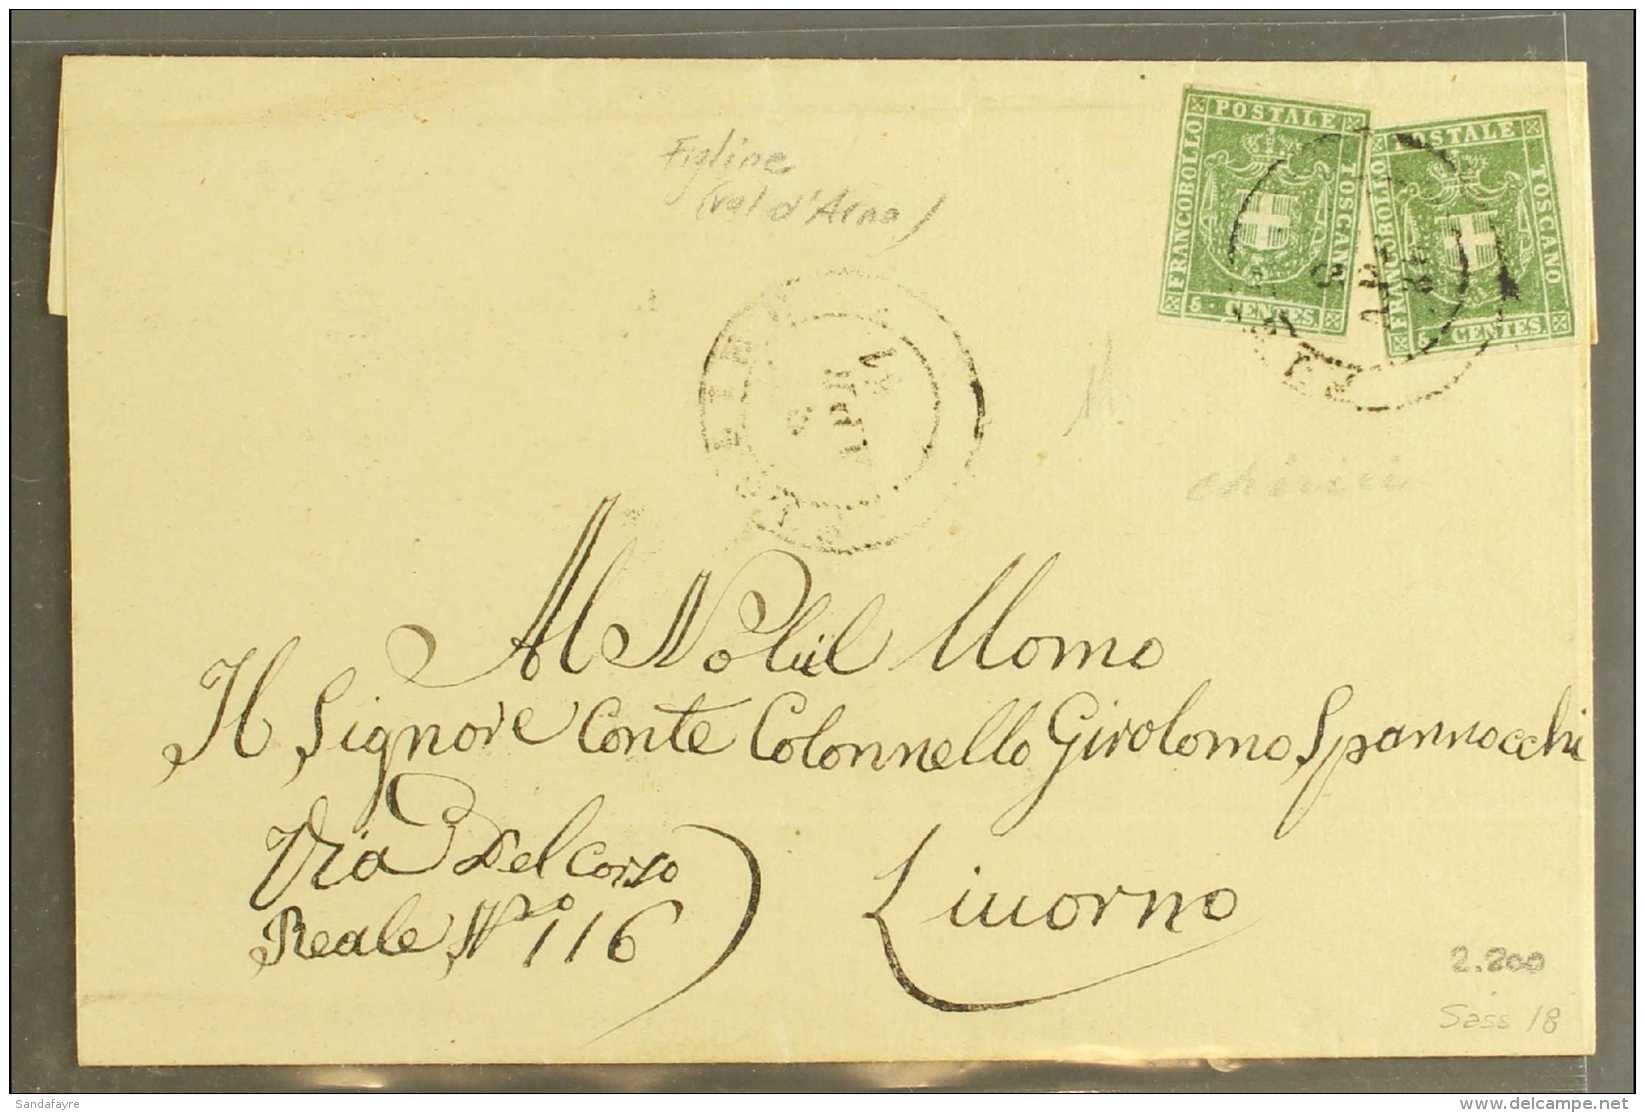 TUSCANY 1861 Cover Addressed To Count Colonel Girolom Spannocchi Franked 1860 5c Green (2) Sent From Florence To... - Unclassified